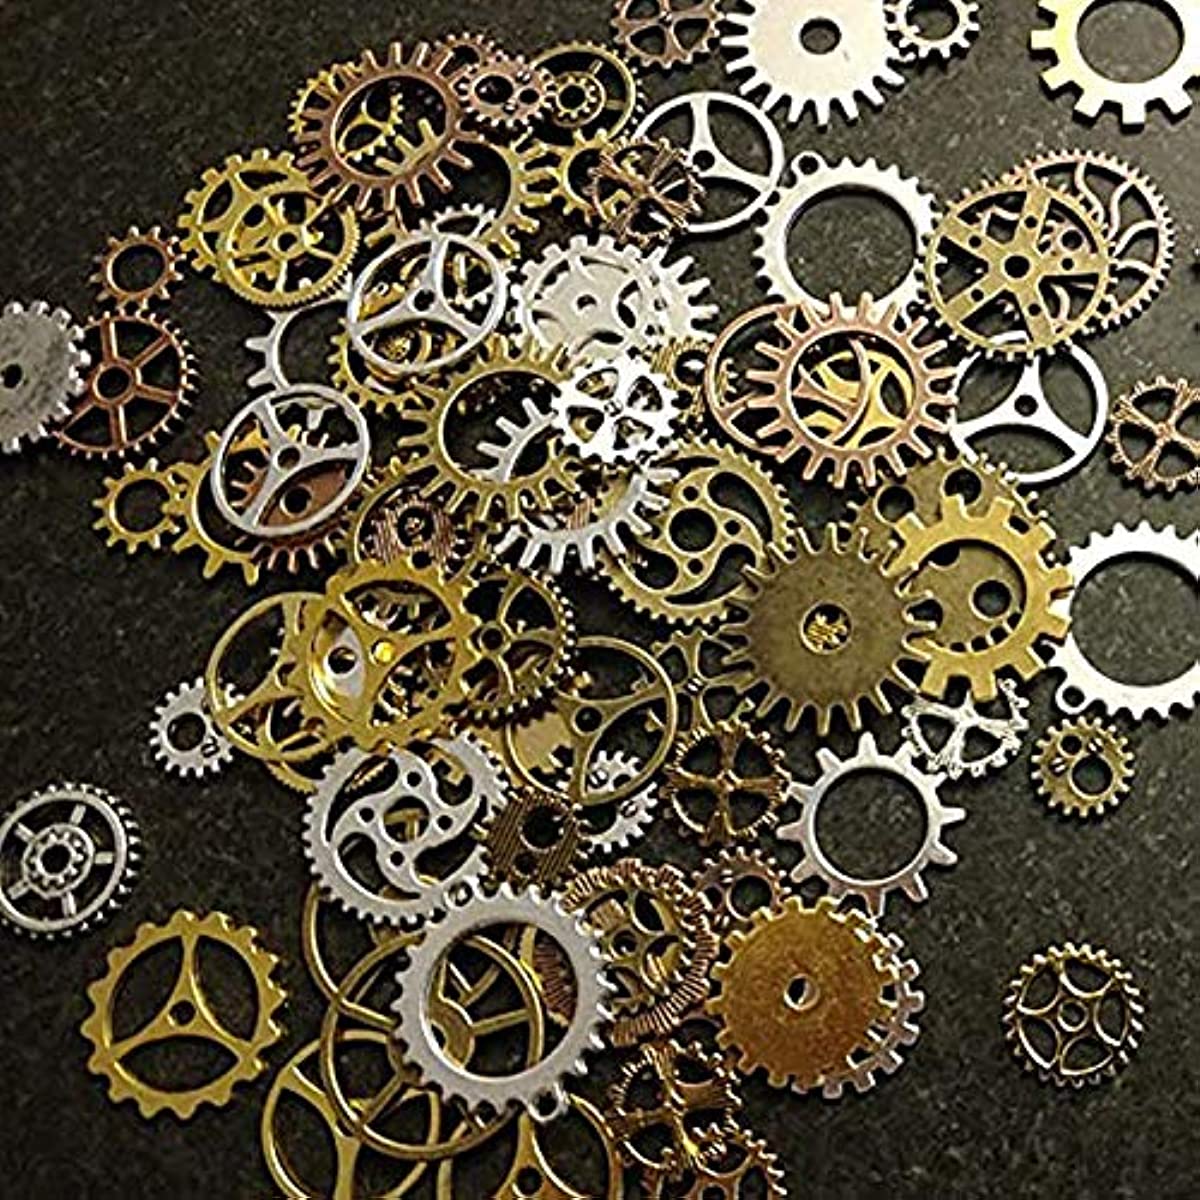 100 Gram Antique Metal Steampunk Gears Charms, Clock Watch Wheel Gear  Pendant for Crafting, Jewelry Making, Steampunk Accessories